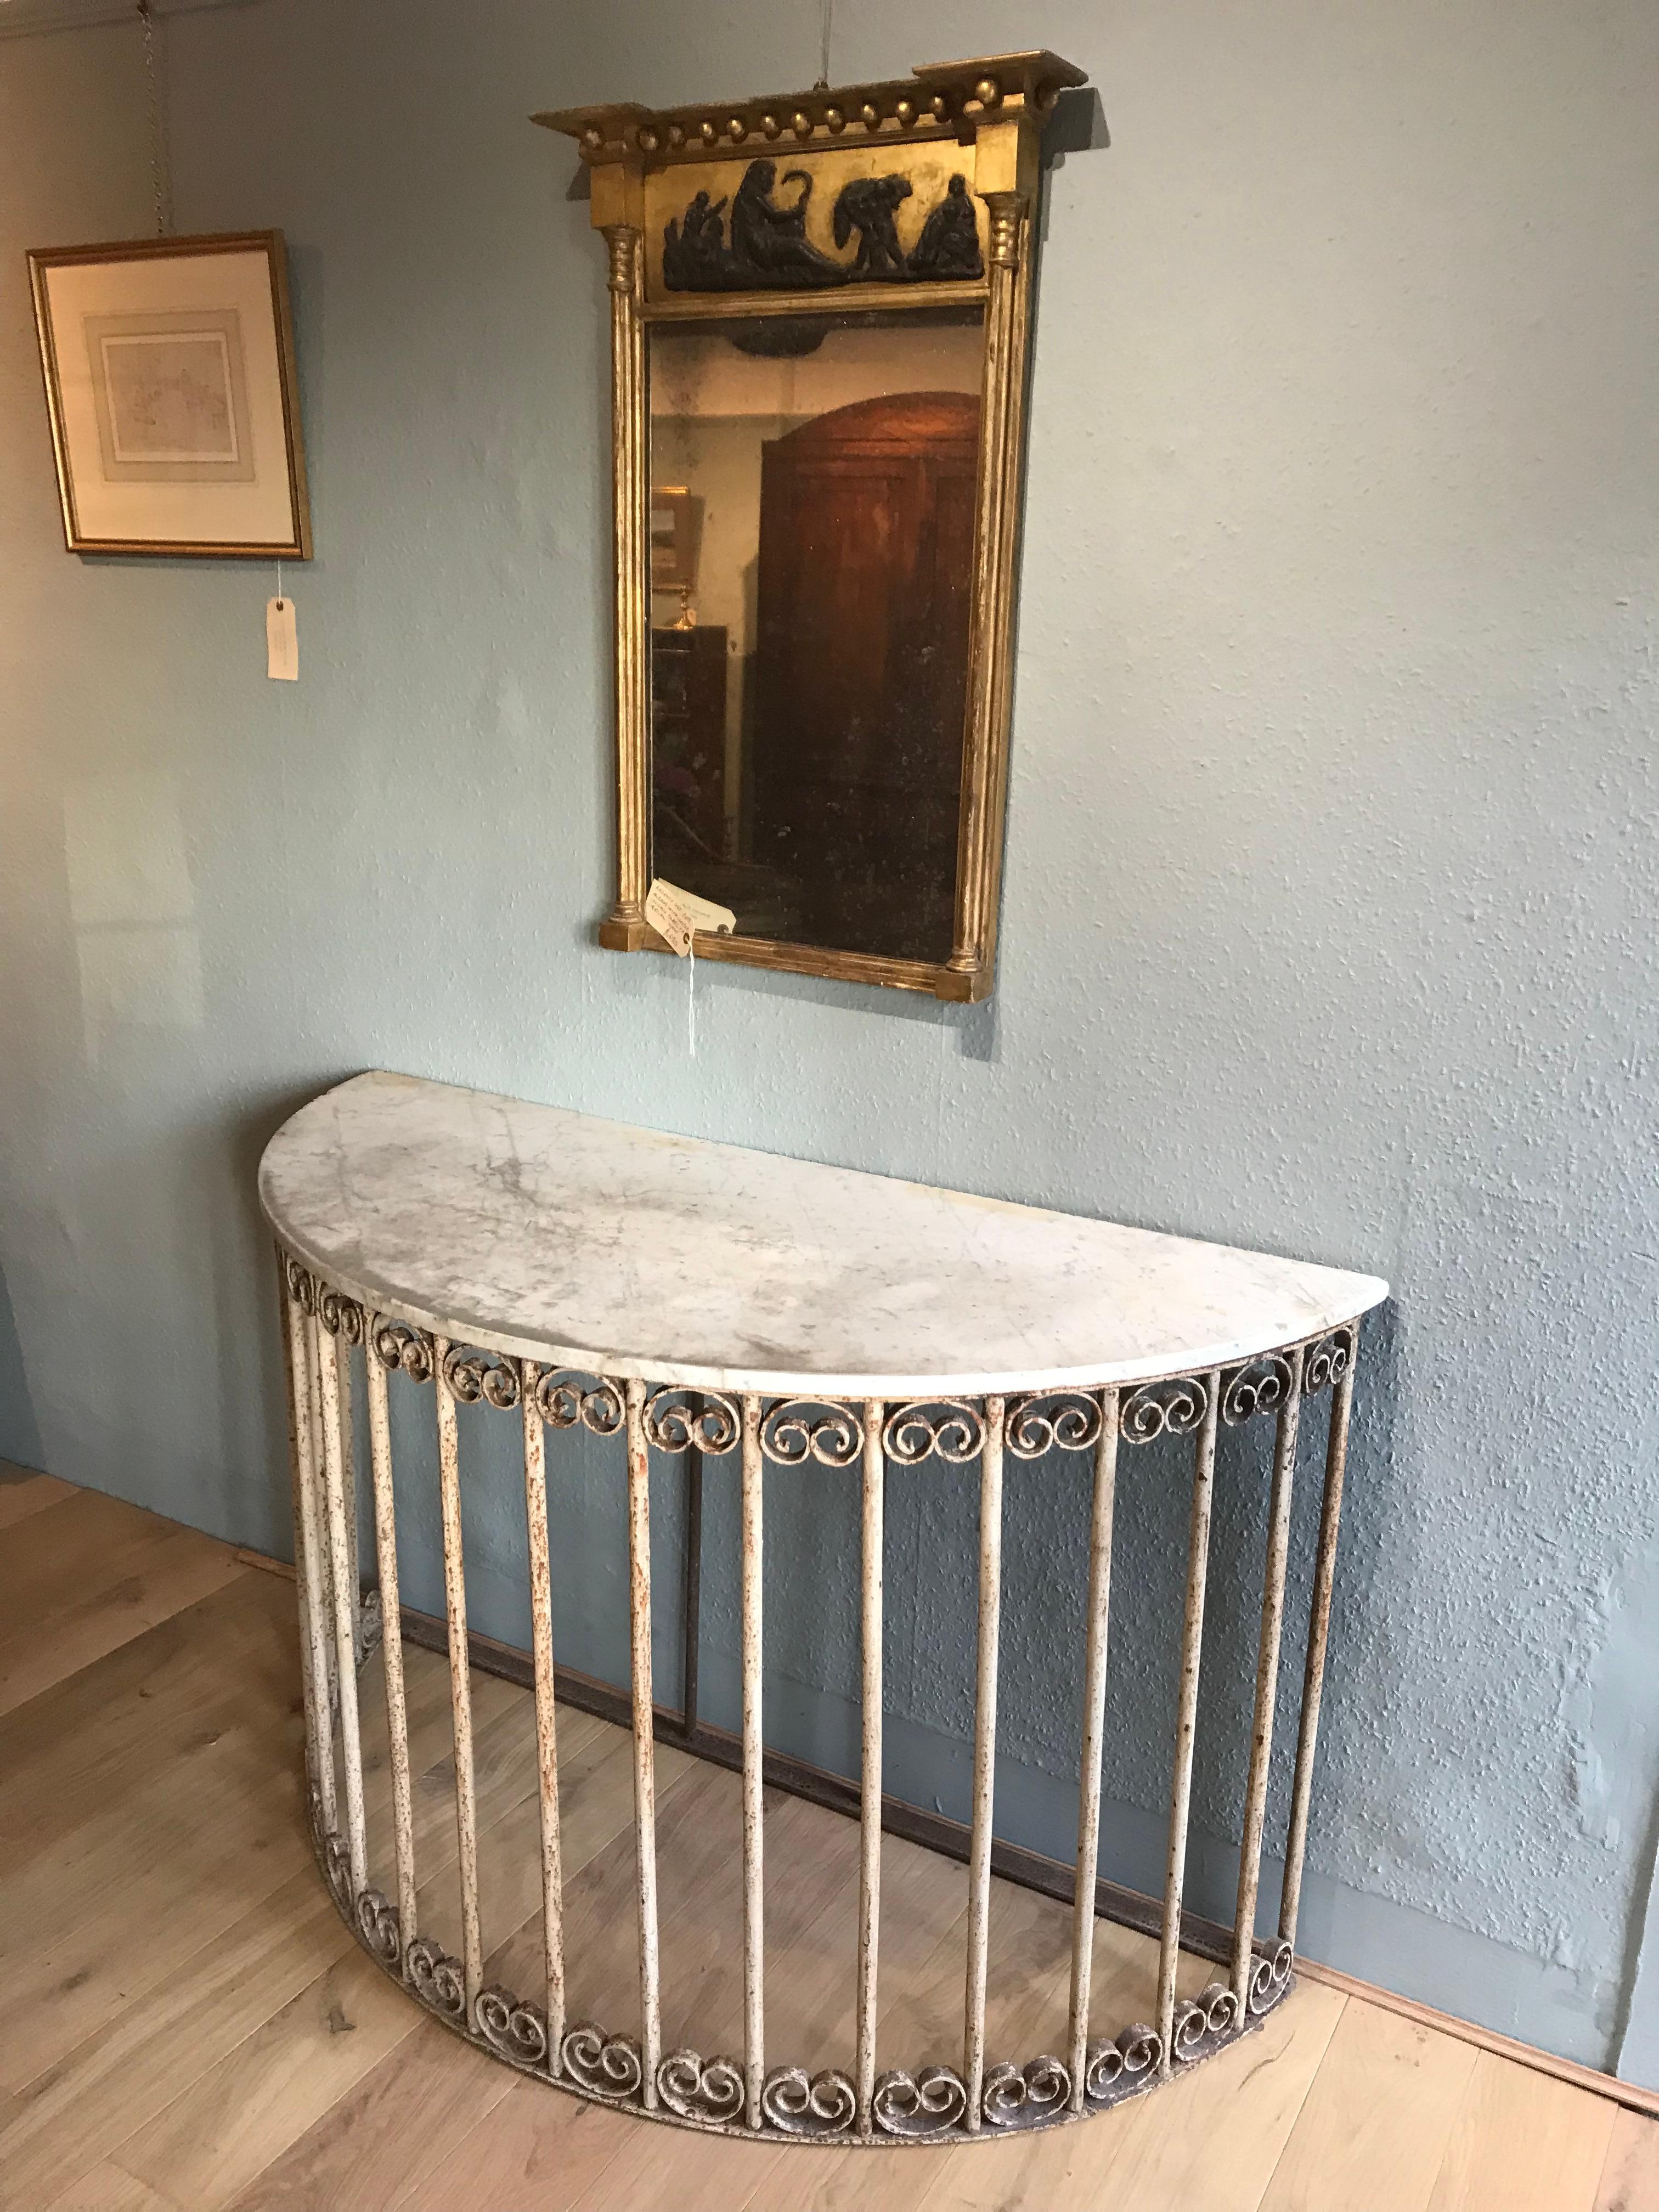 19th Century demi-lune wrought iron and marble topped console table of good scale. This attractive console has a white aged marble top resting on a slightly distressed painted base. The wrought iron base features ornate scroll decorations between